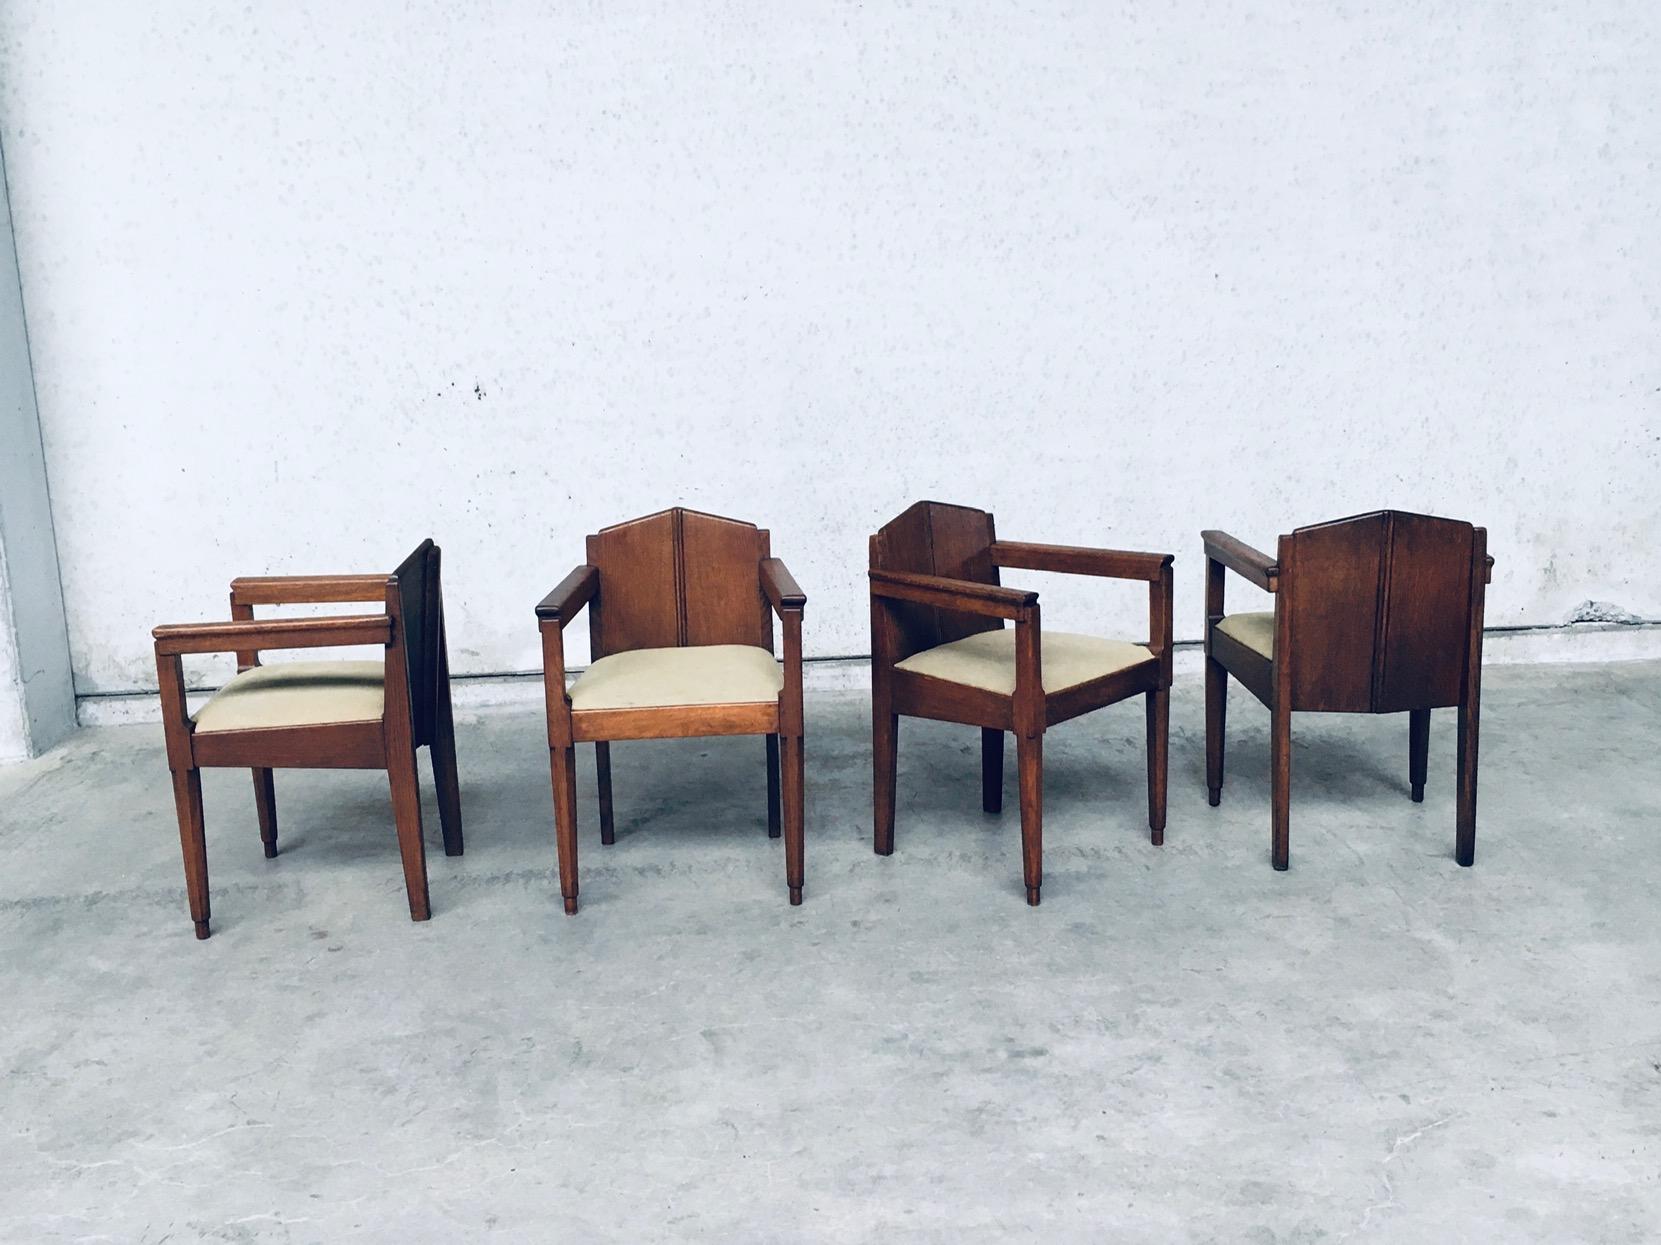 1910's Dutch Modernism Design Amsterdam School Dining Chair set In Fair Condition For Sale In Oud-Turnhout, VAN